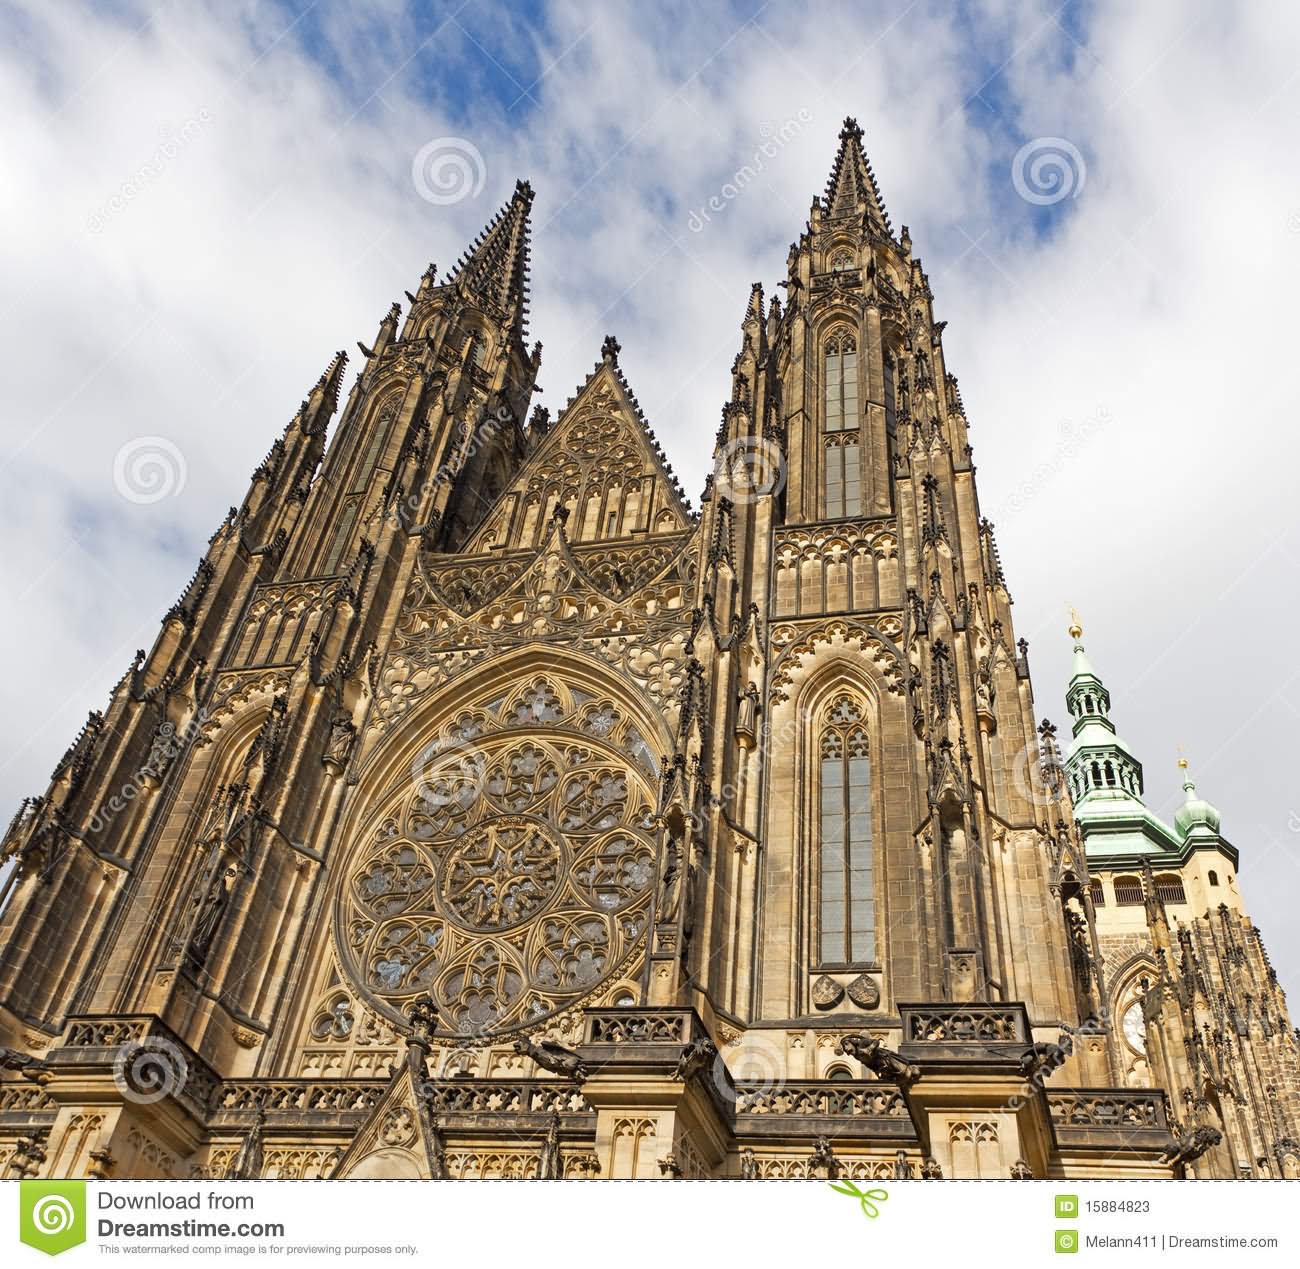 The St. Vitus Cathedral View